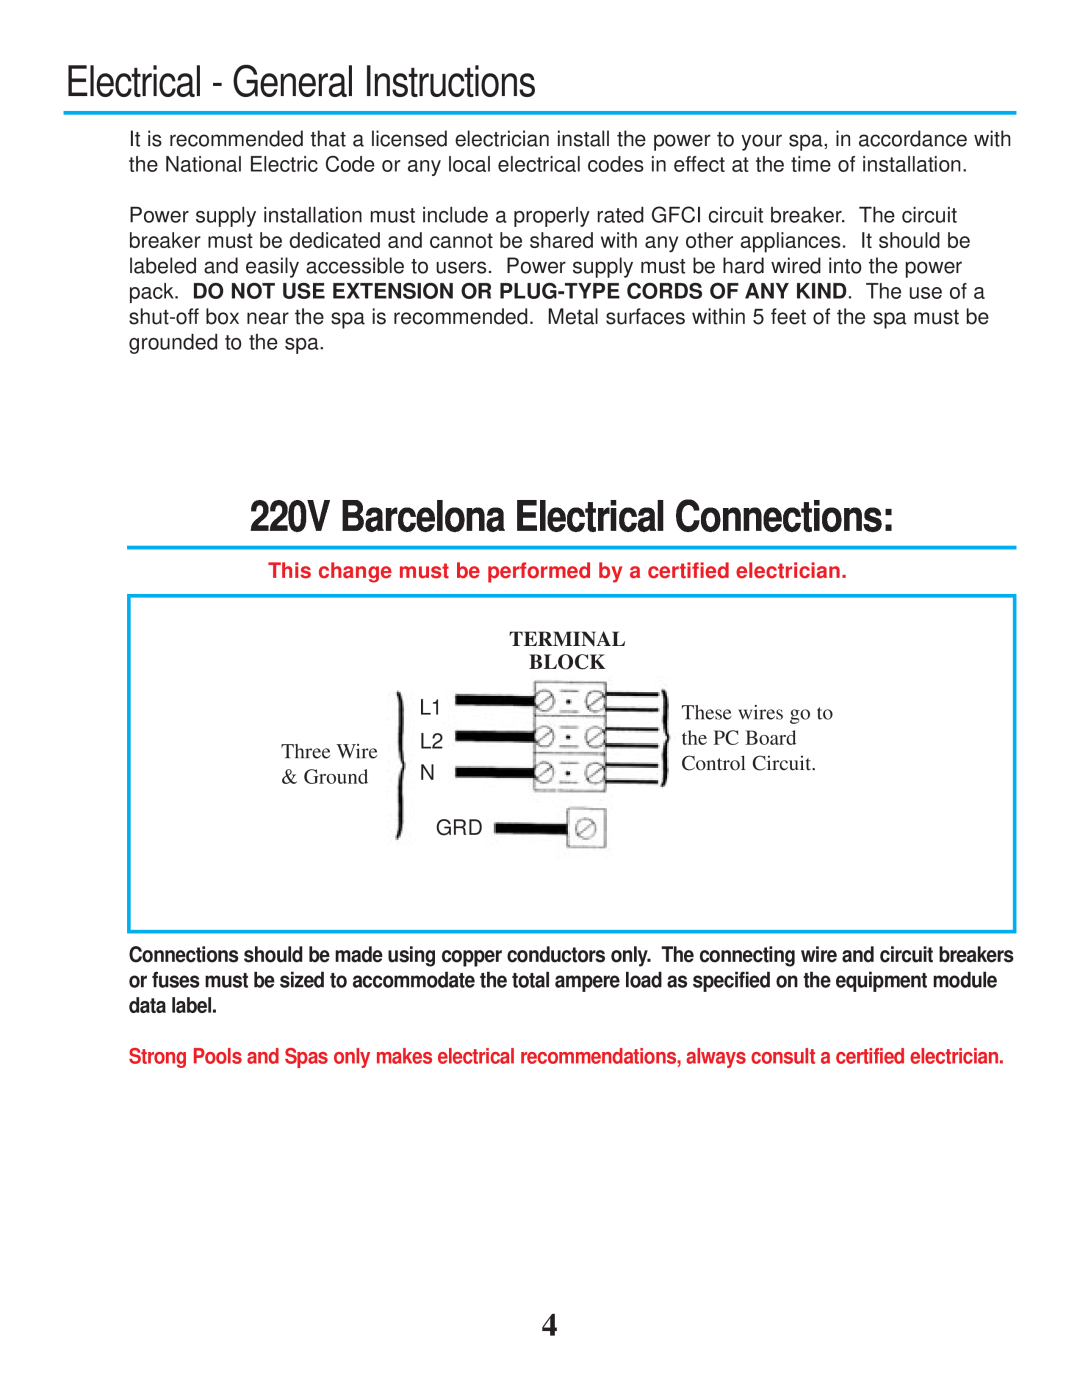 Strong Pools and Spas Electrical - General Instructions, 220V Barcelona Electrical Connections, Three Wire, Ground 